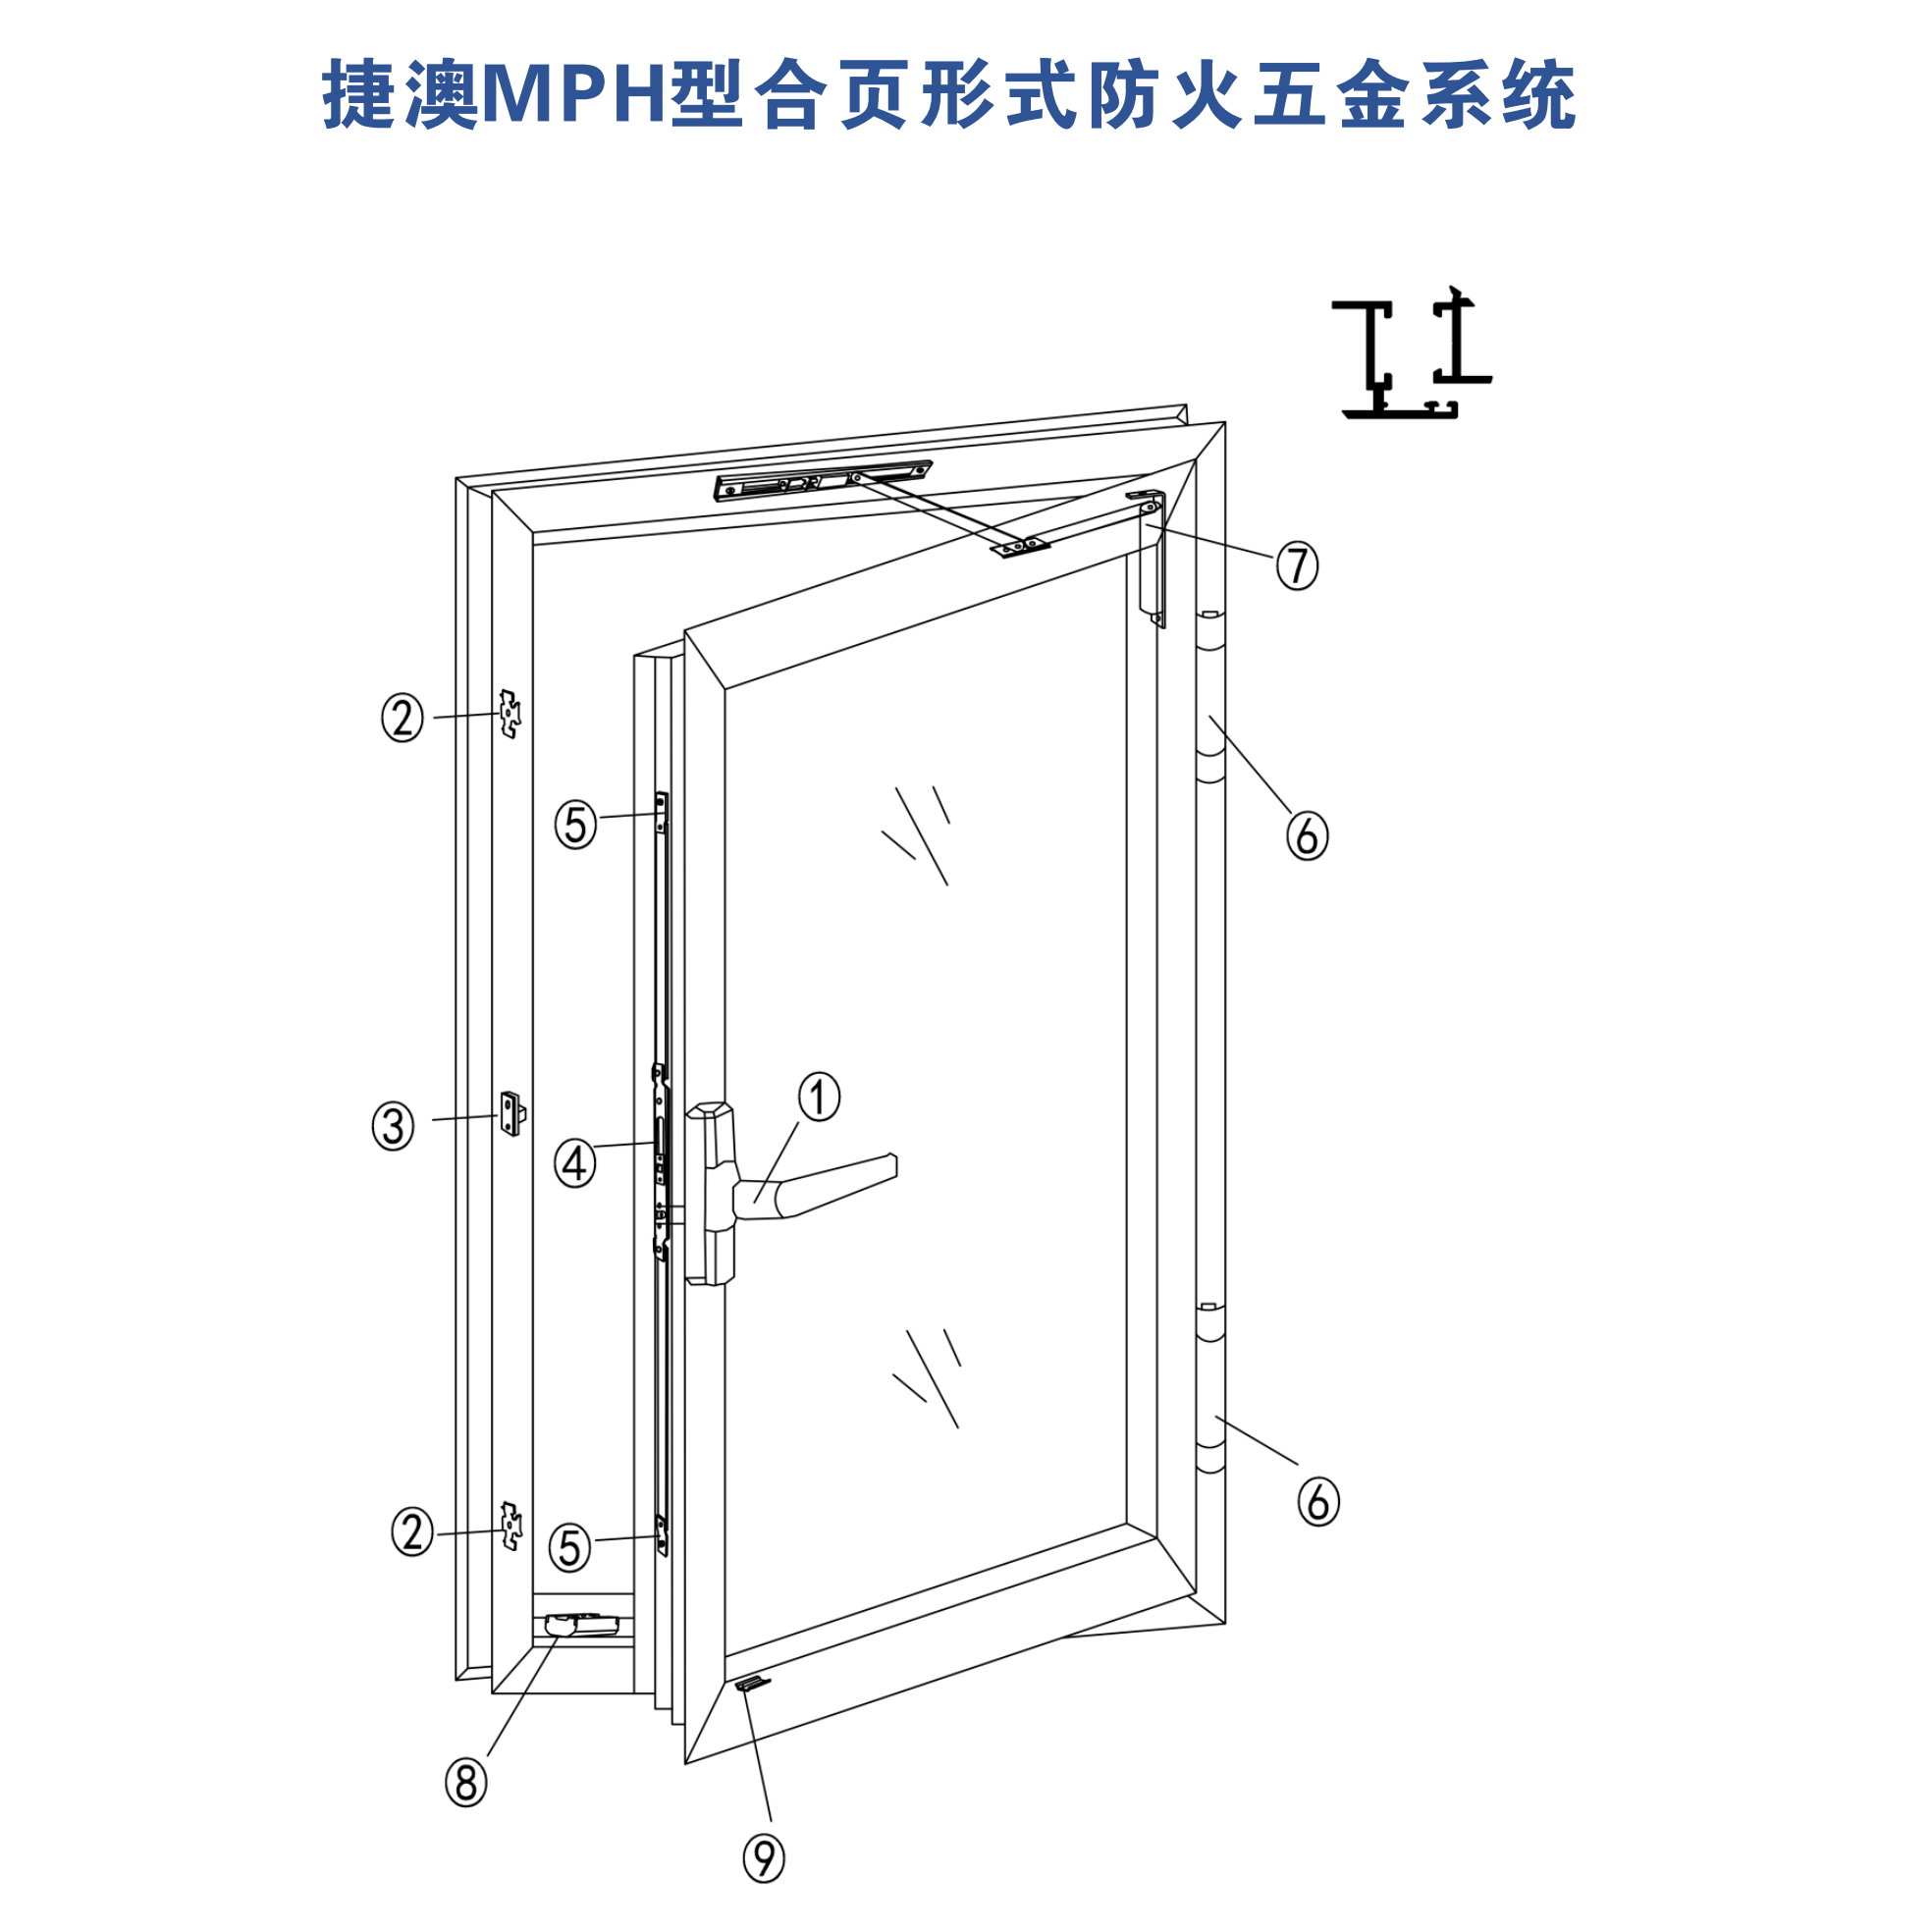 Jieao MPH hinged fireproof hardware system